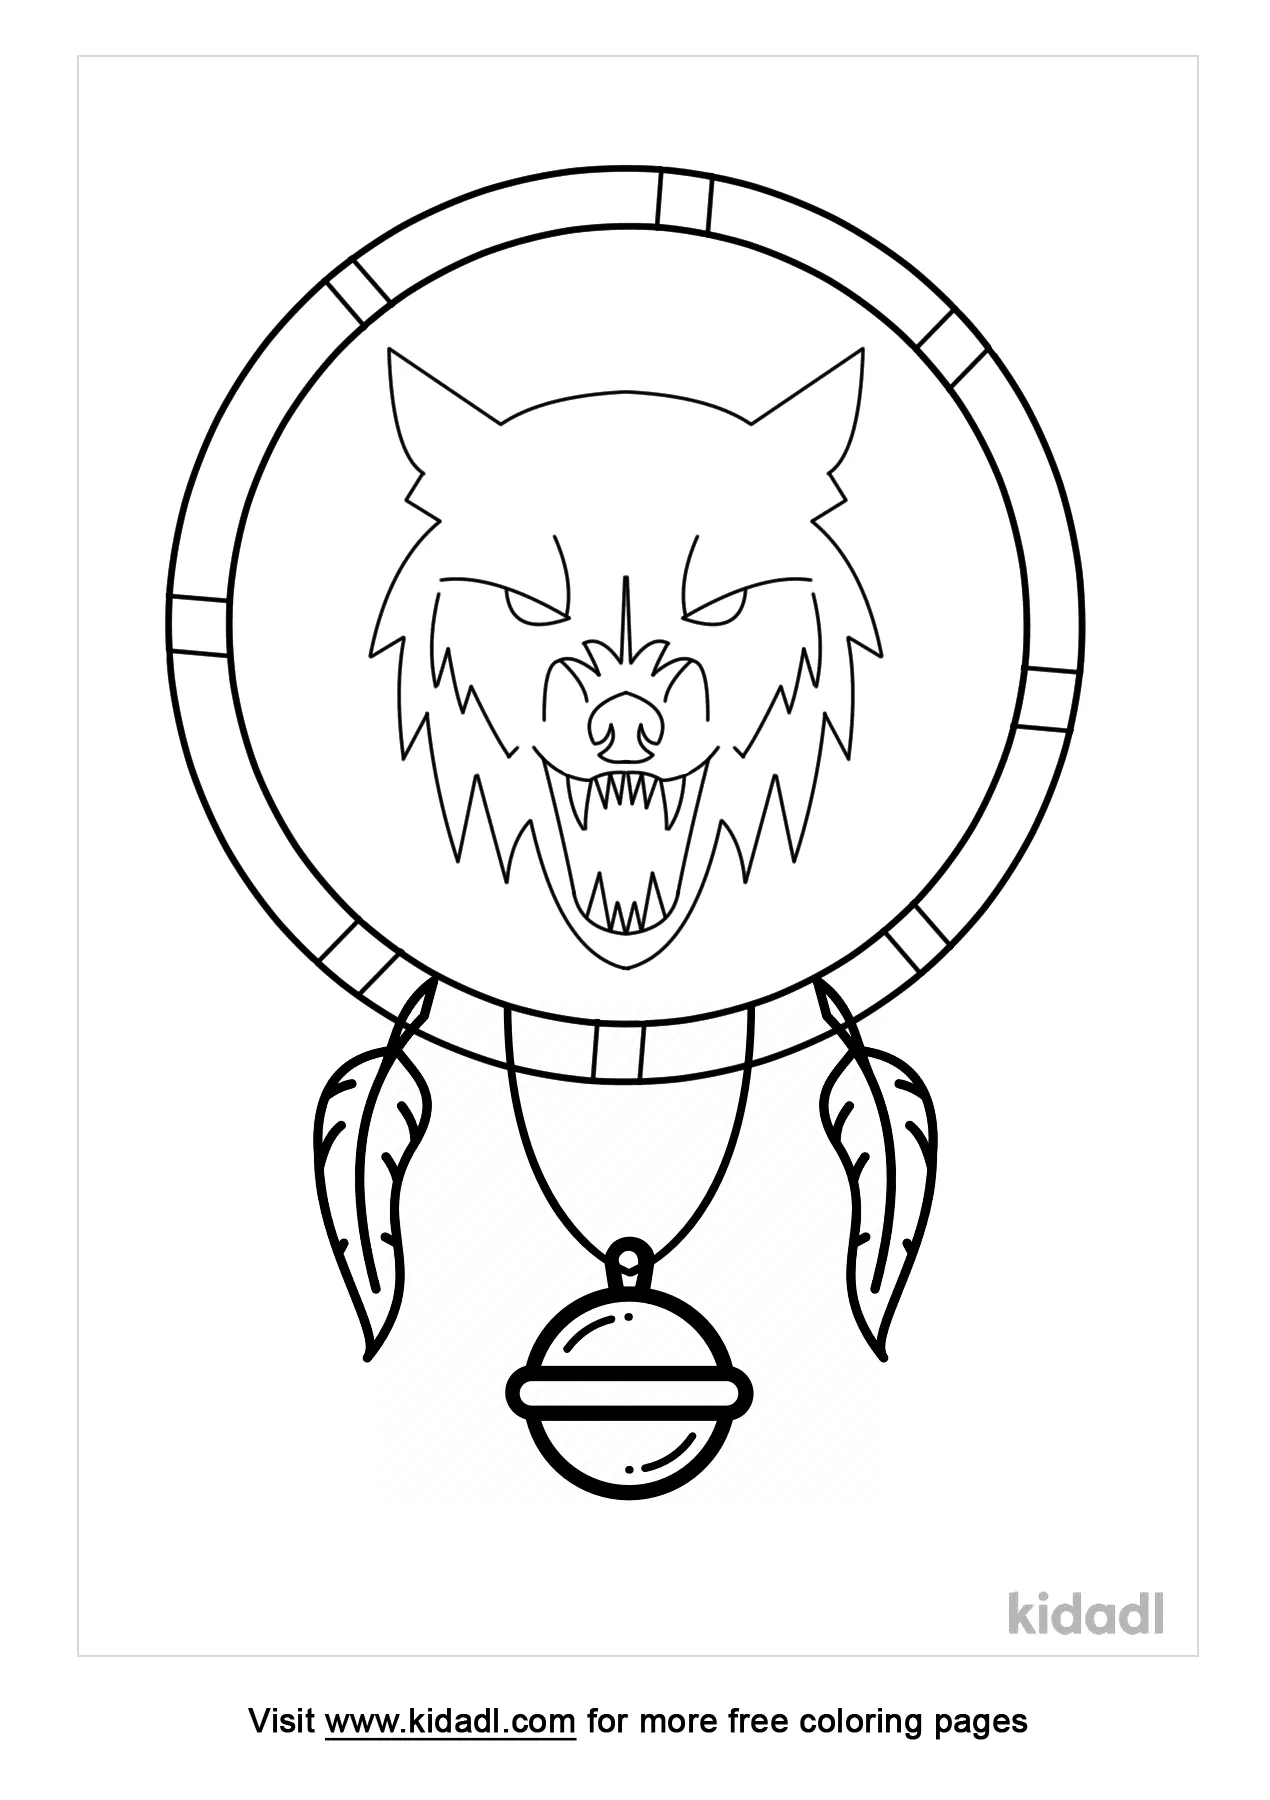 catcher coloring pages